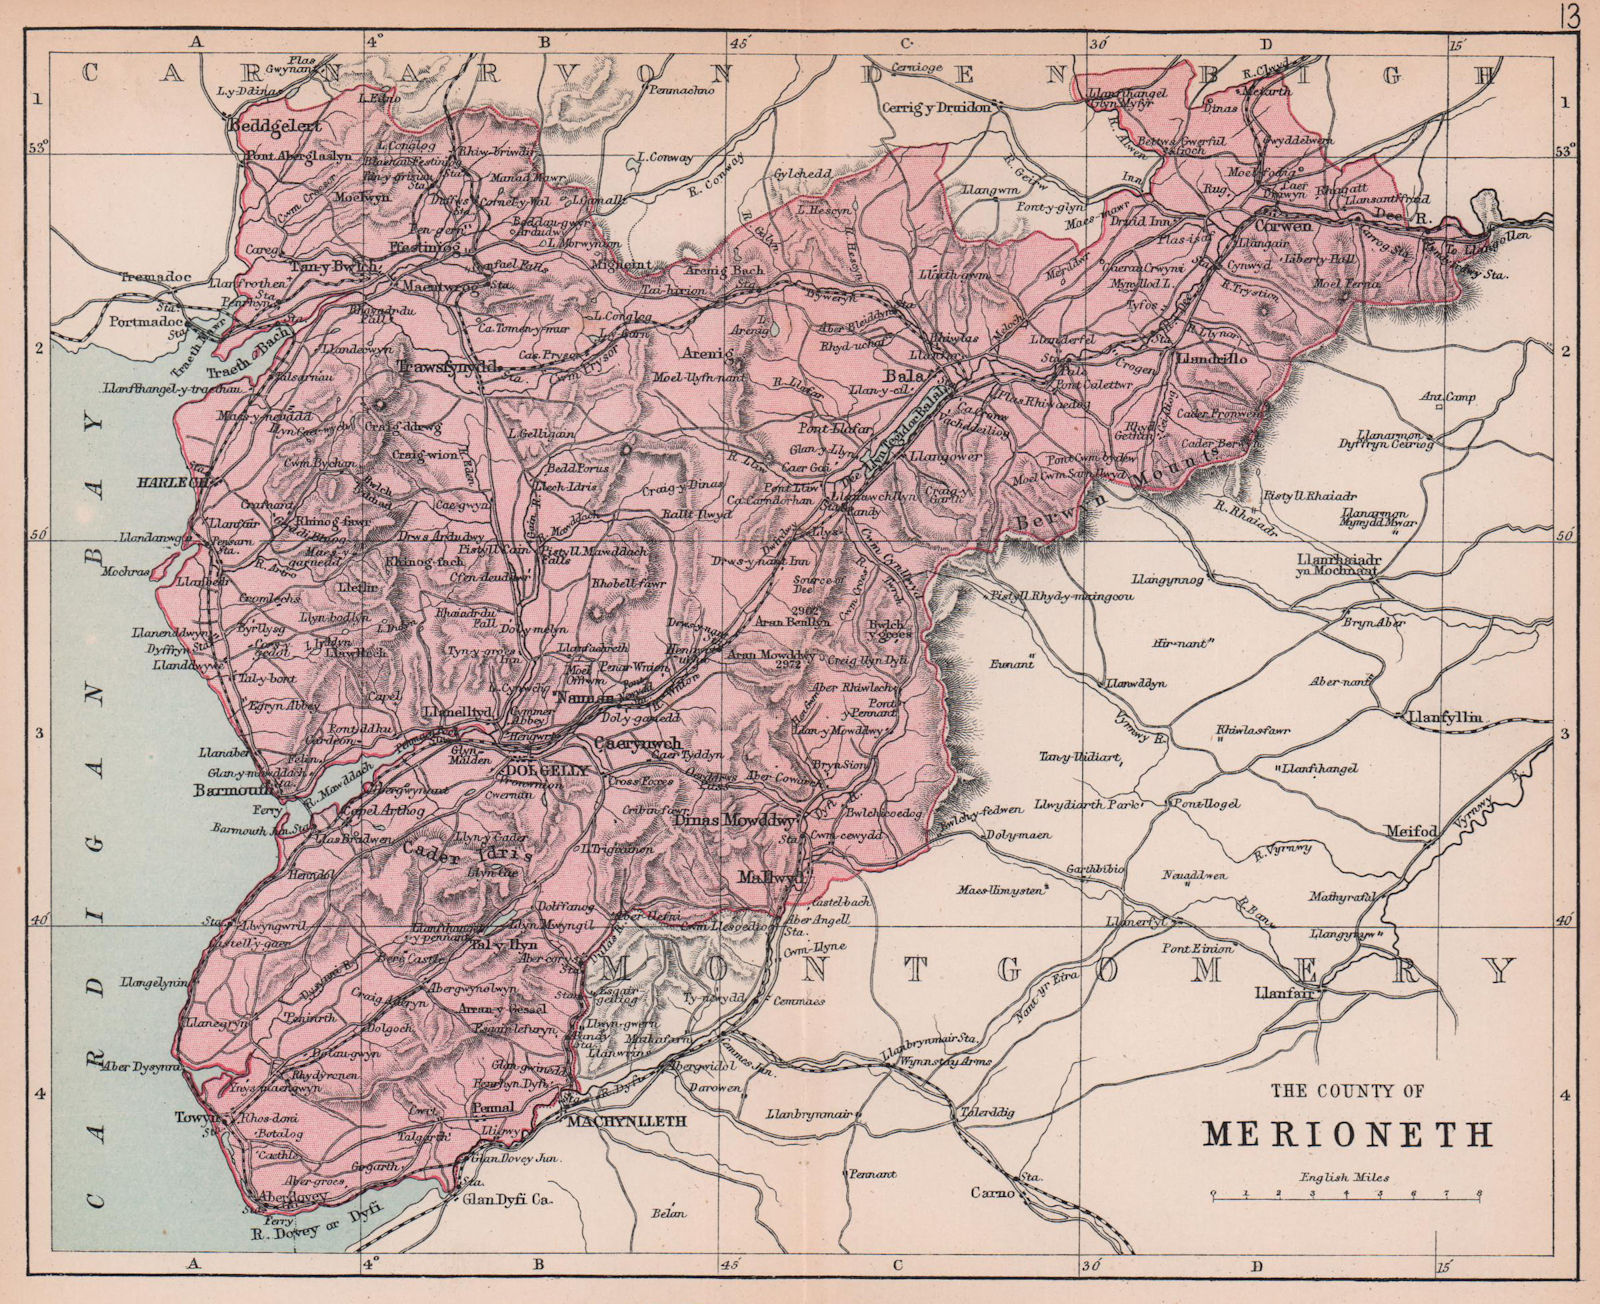 Associate Product MERIONETHSHIRE "County of Merioneth" Barmouth Tywyn Wales BARTHOLOMEW 1882 map